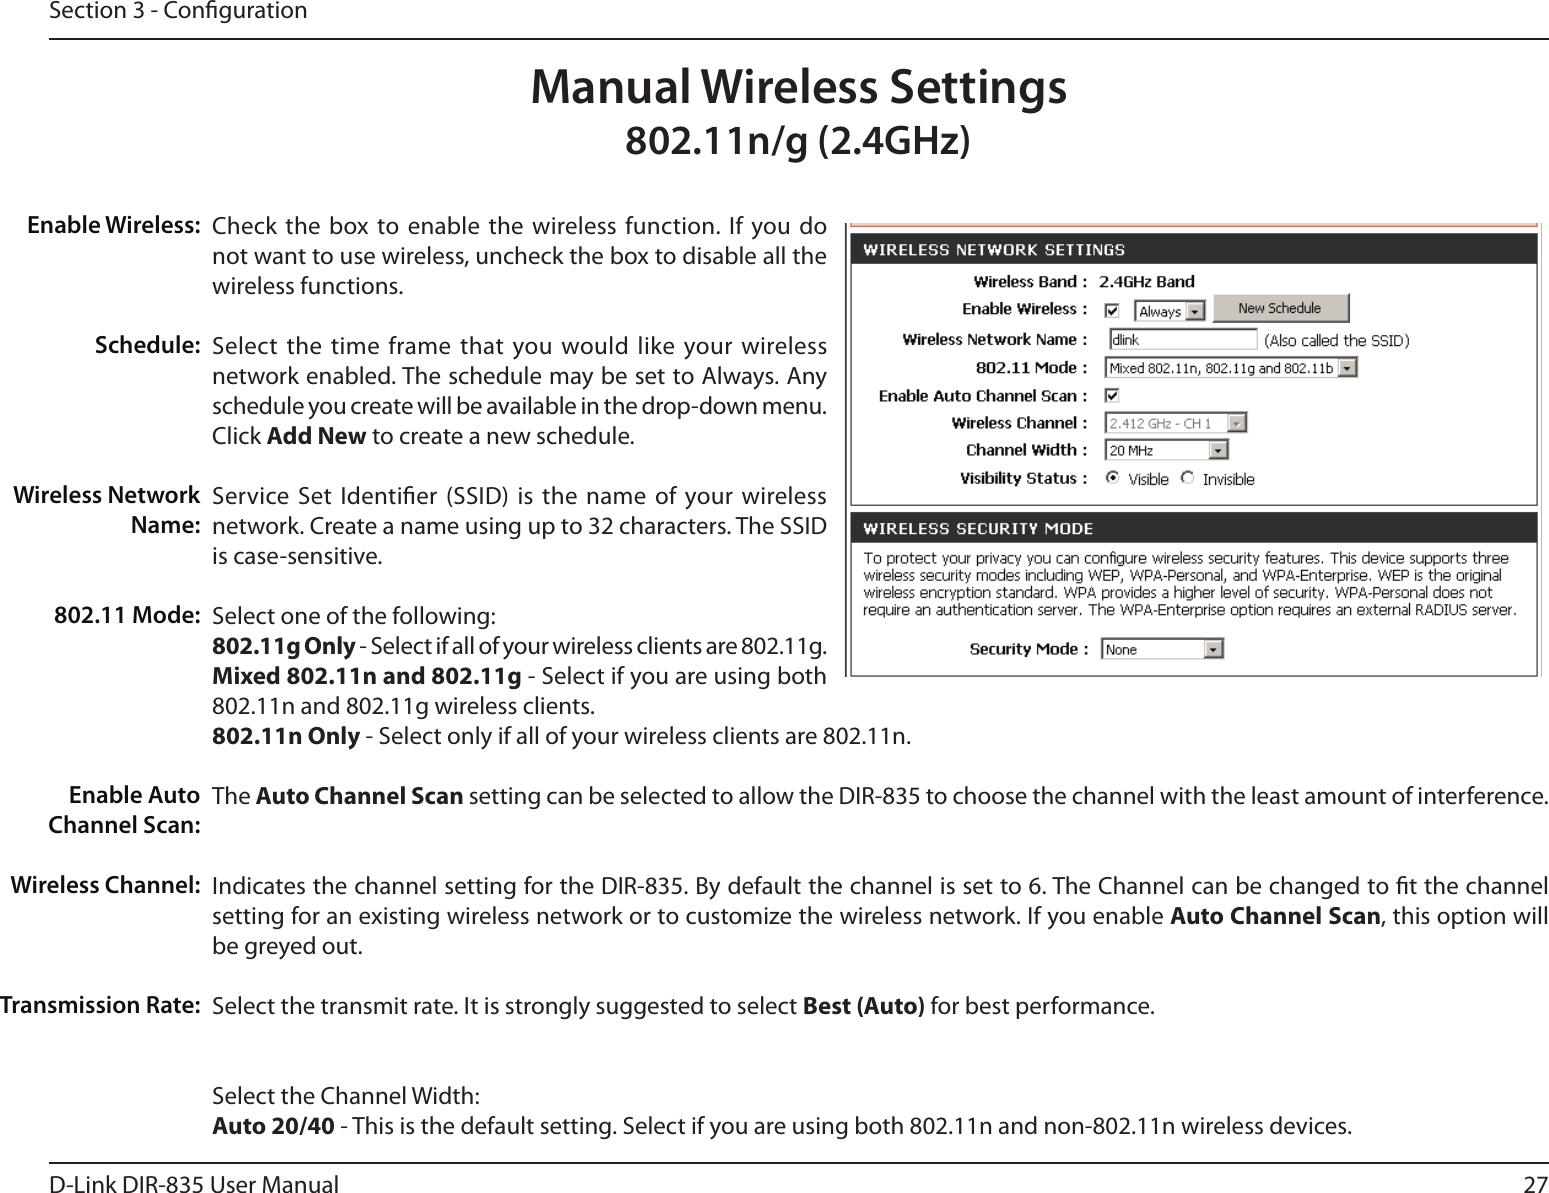 27D-Link DIR-835 User ManualSection 3 - CongurationCheck the  box to enable  the wireless function.  If  you do not want to use wireless, uncheck the box to disable all the wireless functions.Select  the time frame that you would like  your wireless network enabled. The schedule may be set to Always. Any schedule you create will be available in the drop-down menu. Click Add New to create a new schedule.Service Set  Identier (SSID) is the  name of  your wireless network. Create a name using up to 32 characters. The SSID is case-sensitive.Select one of the following:802.11g Only - Select if all of your wireless clients are 802.11g.Mixed 802.11n and 802.11g - Select if you are using both 802.11n and 802.11g wireless clients.802.11n Only - Select only if all of your wireless clients are 802.11n.The Auto Channel Scan setting can be selected to allow the DIR-835 to choose the channel with the least amount of interference.Indicates the channel setting for the DIR-835. By default the channel is set to 6. The Channel can be changed to t the channel setting for an existing wireless network or to customize the wireless network. If you enable Auto Channel Scan, this option will be greyed out.Select the transmit rate. It is strongly suggested to select Best (Auto) for best performance.Select the Channel Width:Auto20/40 - This is the default setting. Select if you are using both 802.11n and non-802.11n wireless devices.Enable Wireless:Schedule:Wireless Network Name:802.11 Mode:Enable Auto Channel Scan:Wireless Channel:Transmission Rate:Manual Wireless Settings802.11n/g (2.4GHz)